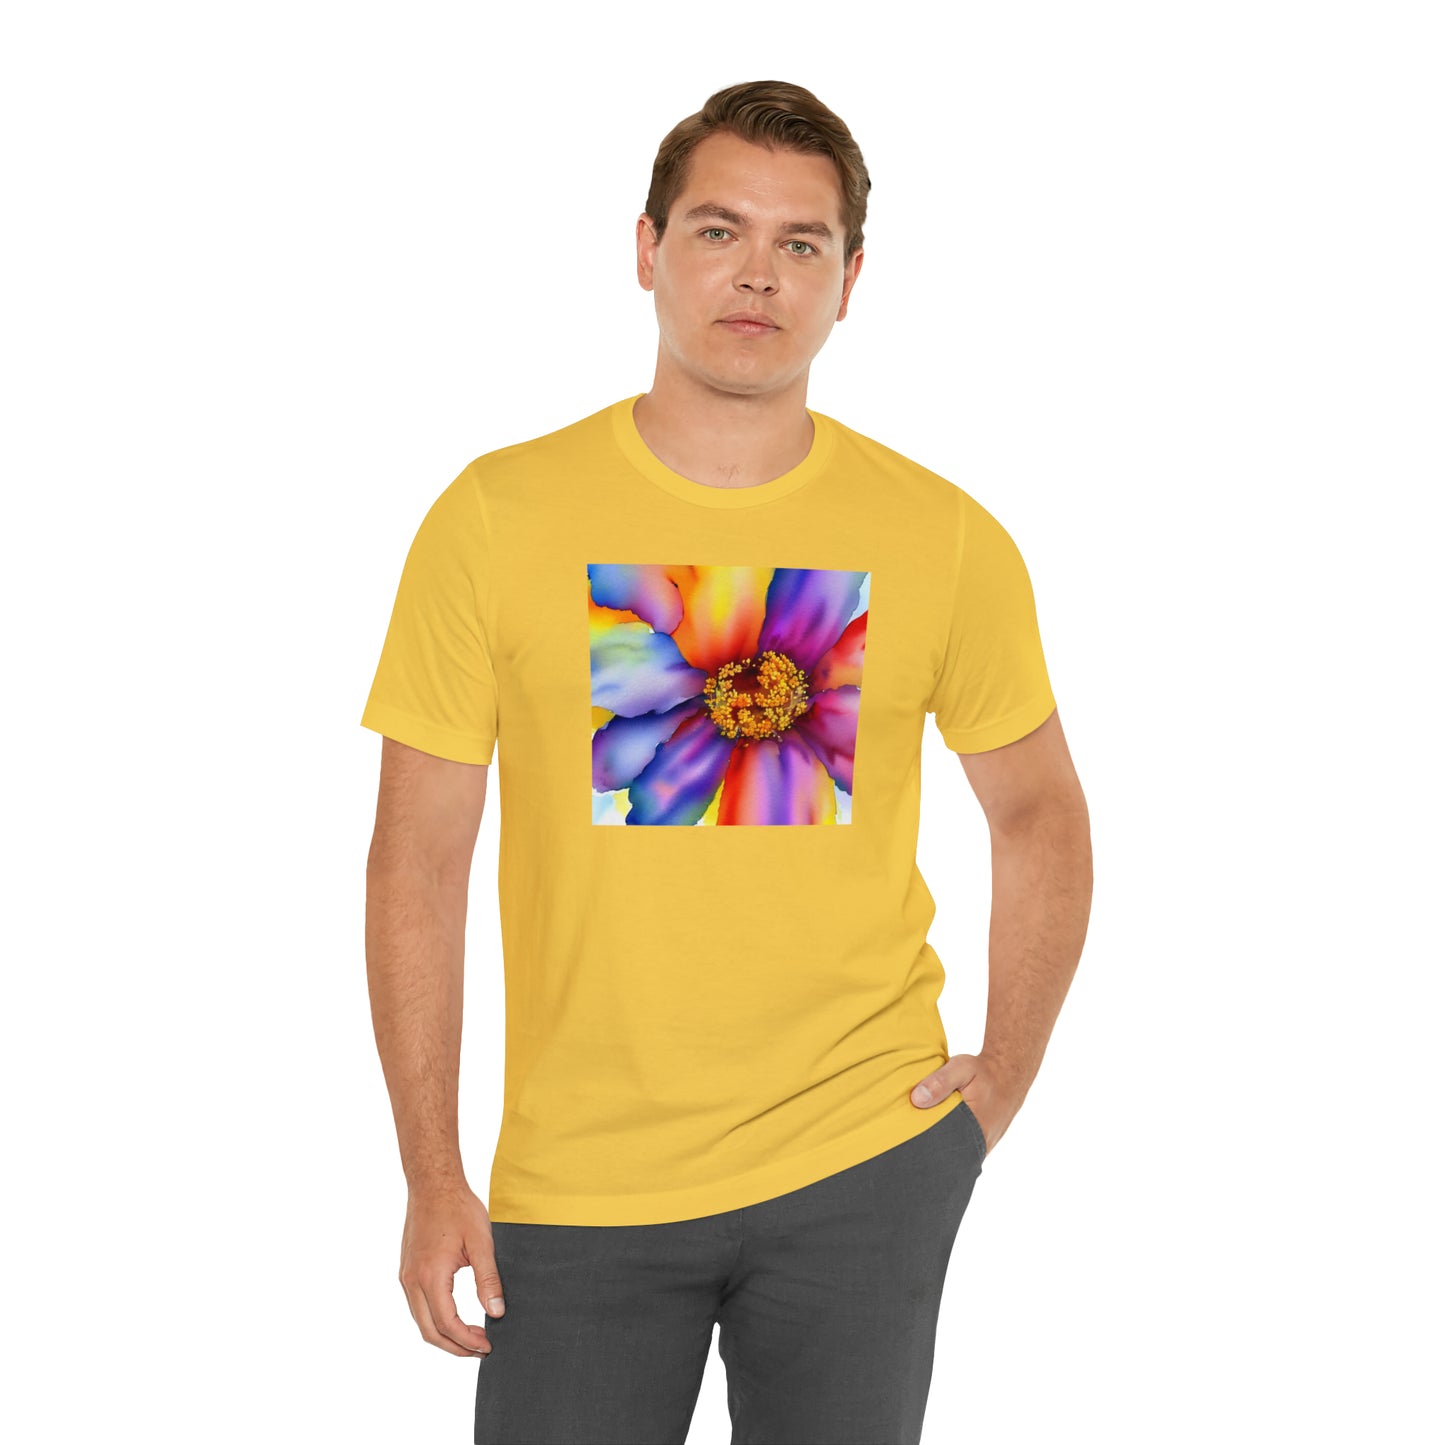 Colorful Open Flower Tee